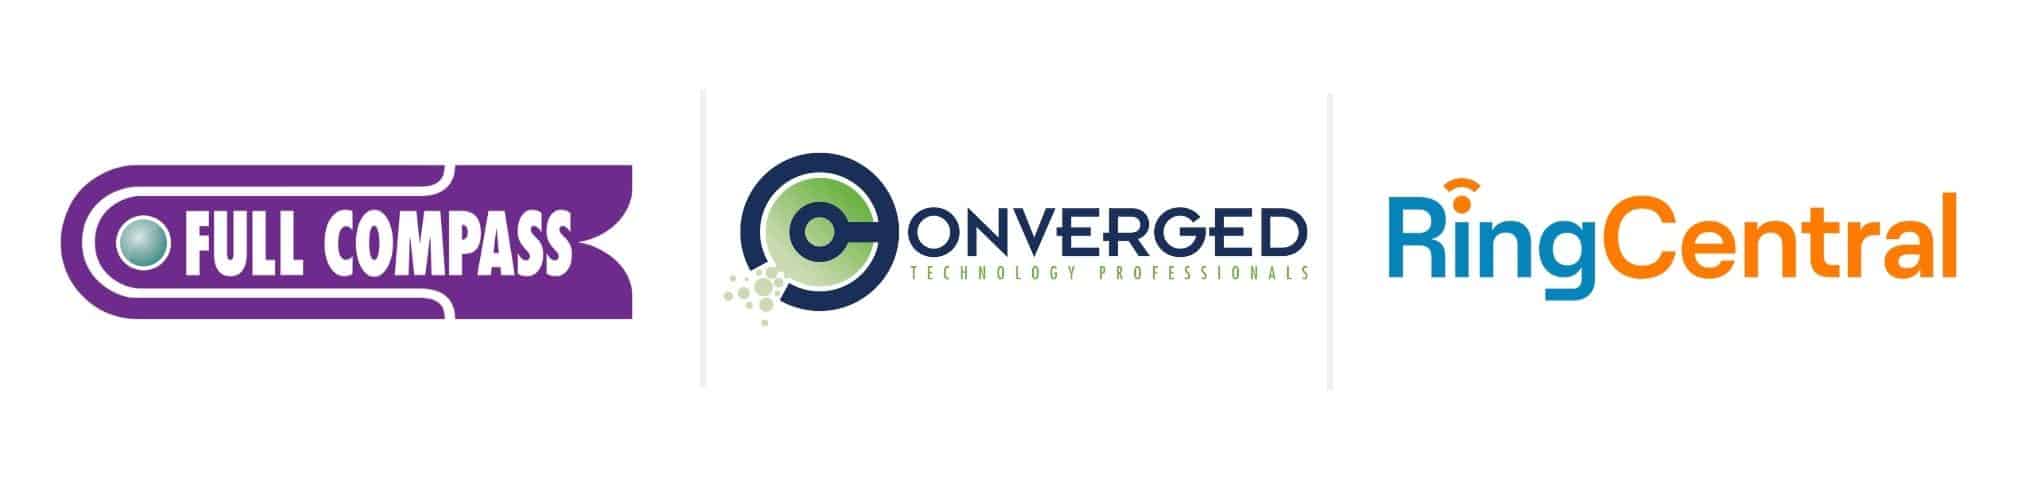 Full Compass | Converged Technology Professionals | RingCentral